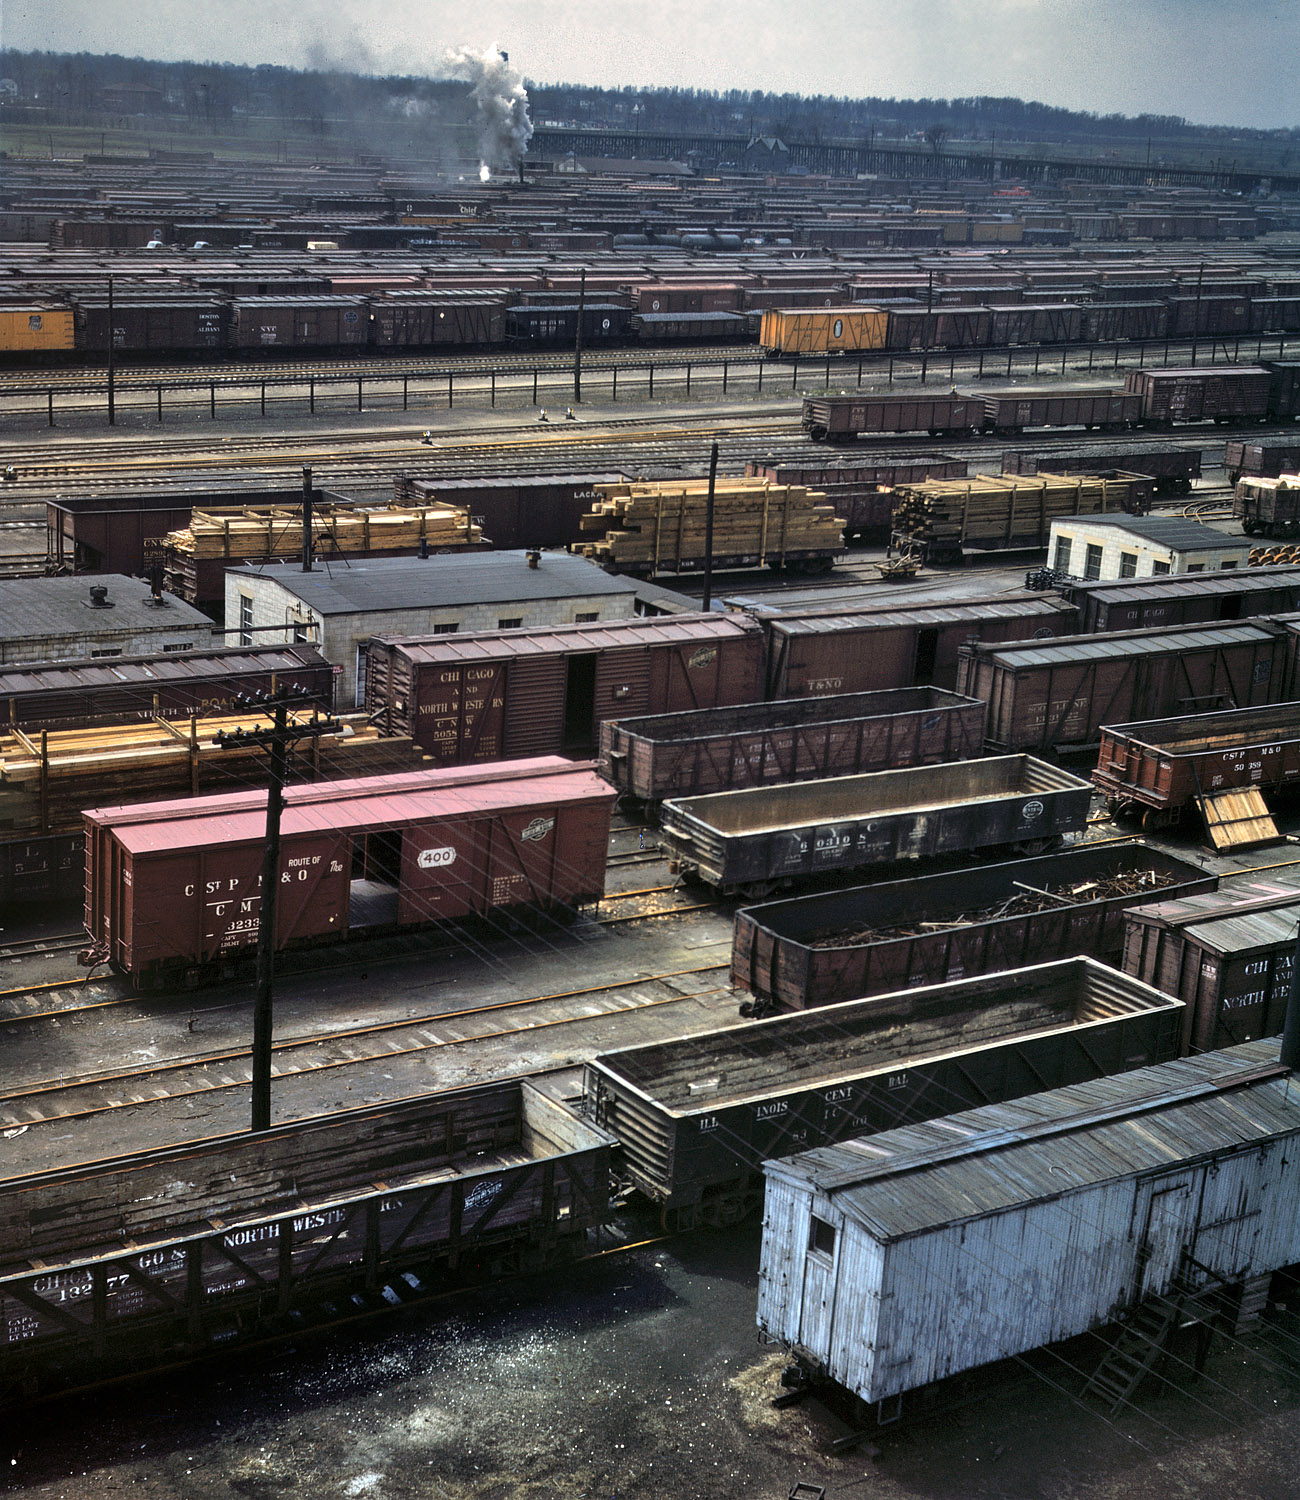 Chicago, April 1943. Proviso freight classification yard of the Chicago & North Western R.R. View full size. 4x5 Kodachrome transparency by Jack Delano.